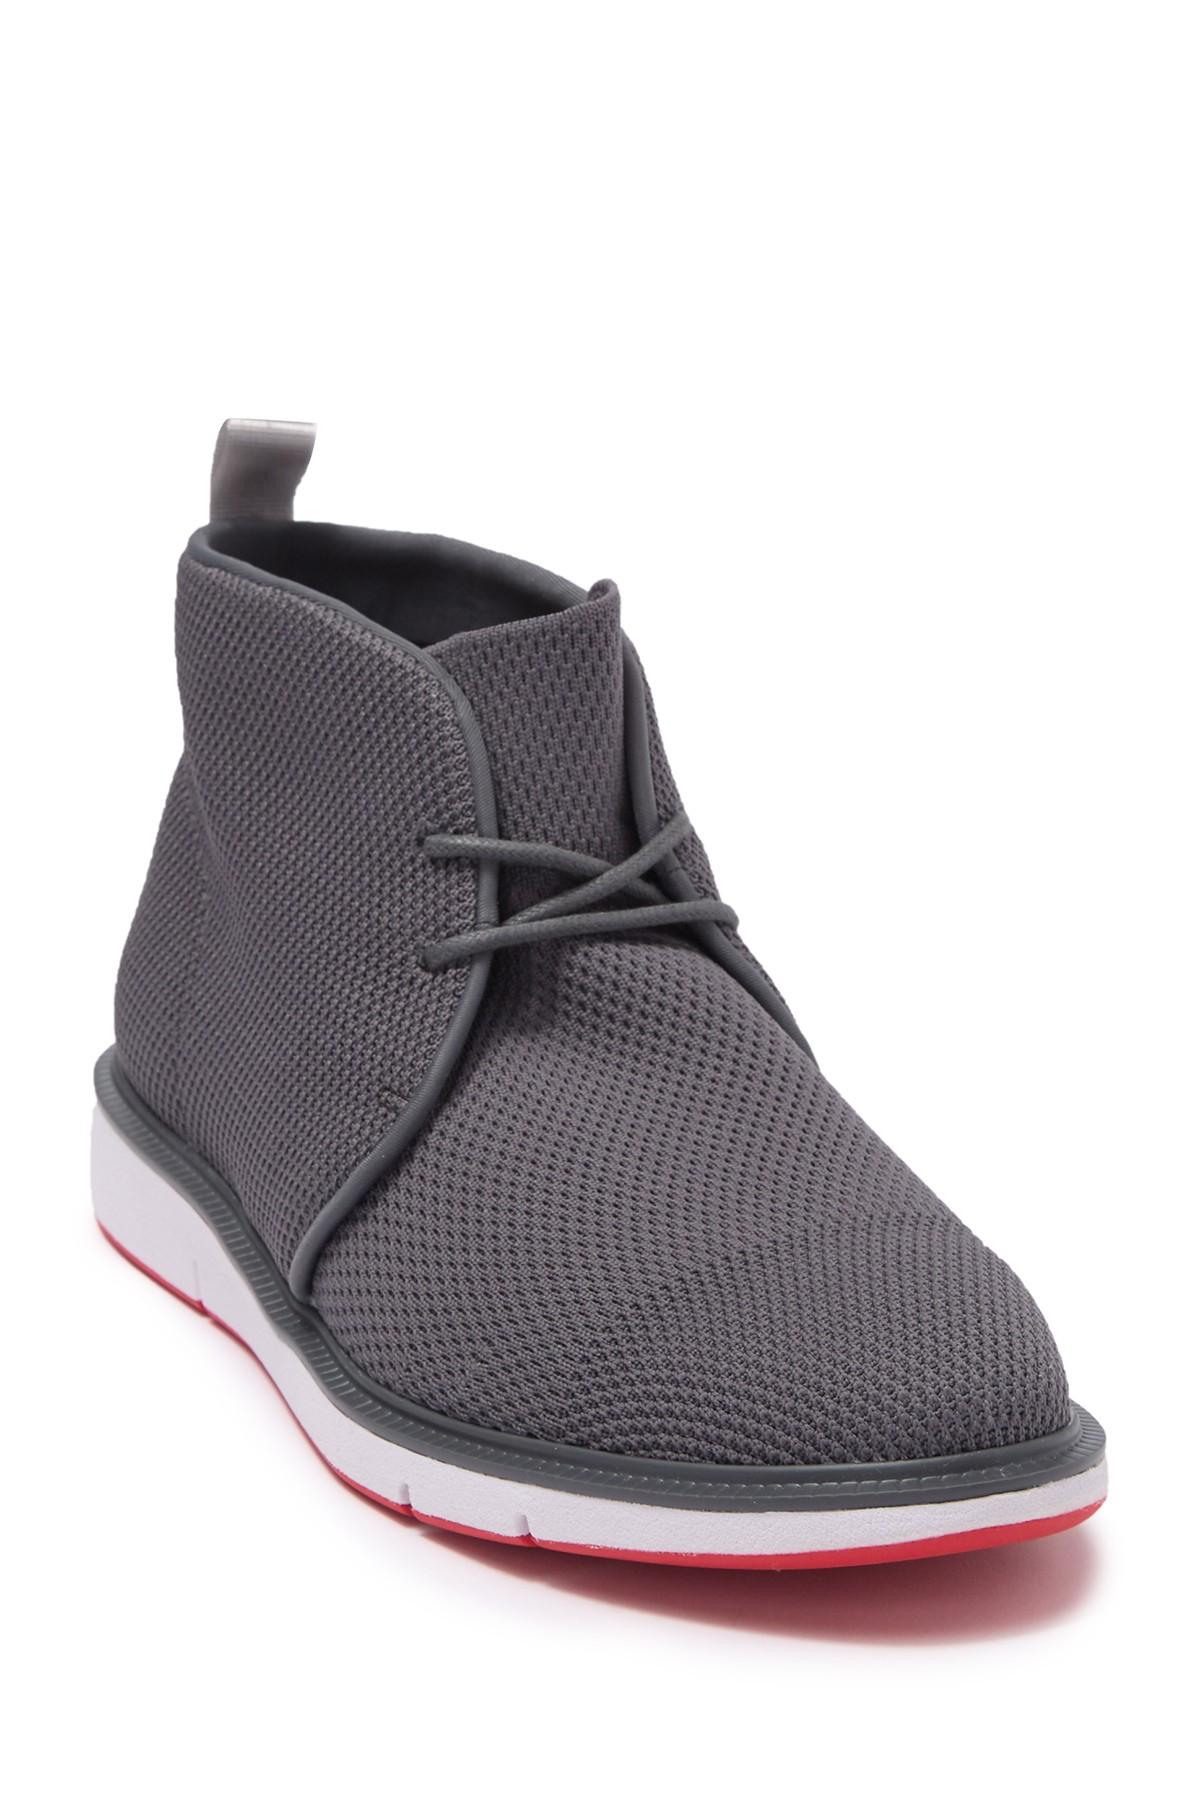 Swims Motion Knit Chukka Boot in Grey (Gray) for Men - Lyst